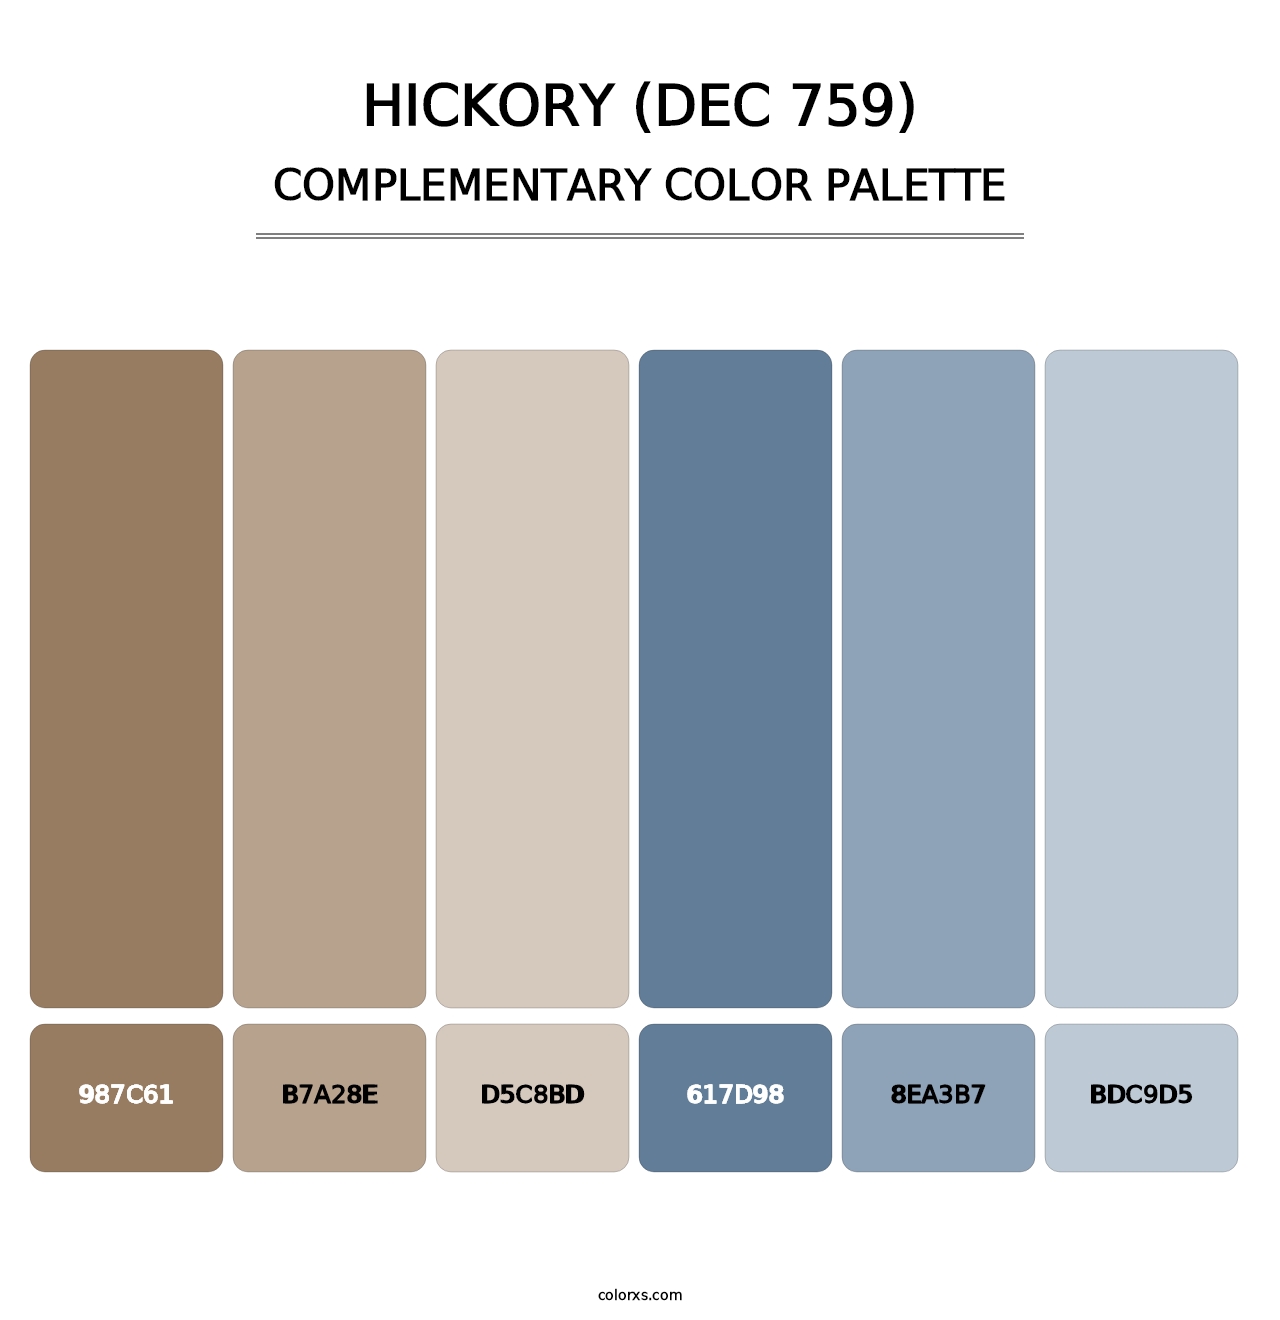 Hickory (DEC 759) - Complementary Color Palette